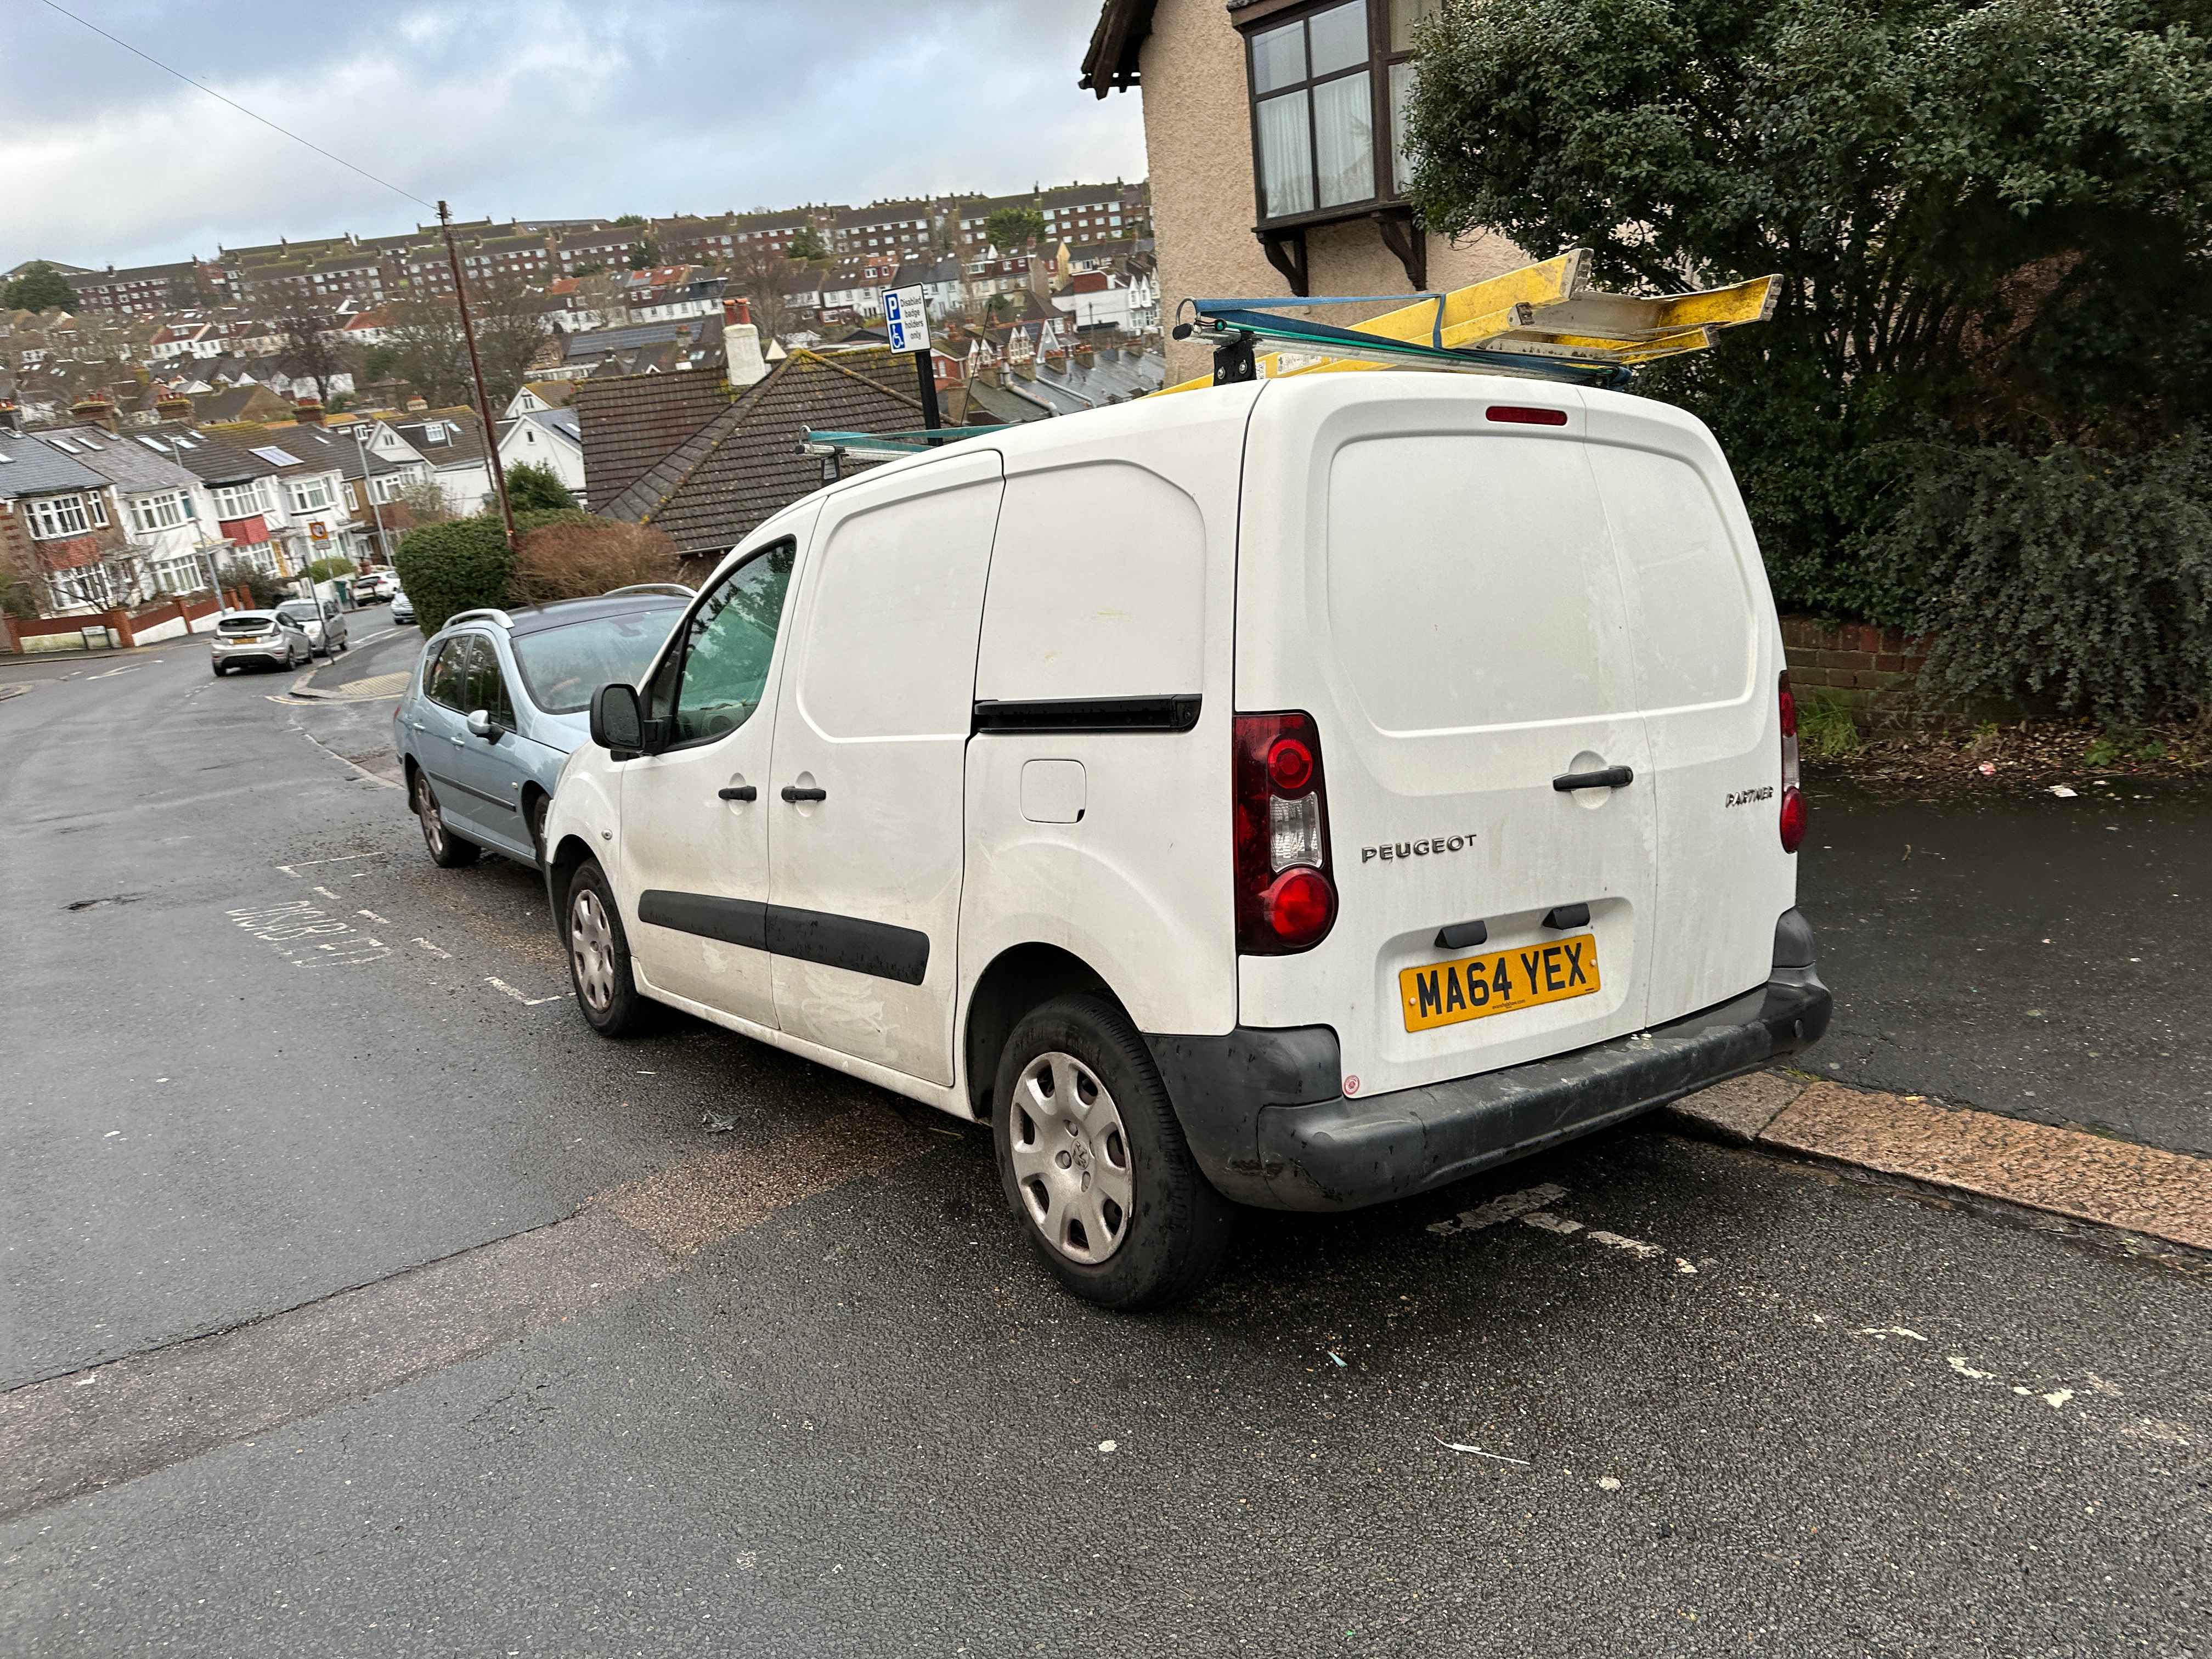 Photograph of MA64 YEX - a White Peugeot Partner parked in Hollingdean by a non-resident. The fourth of six photographs supplied by the residents of Hollingdean.